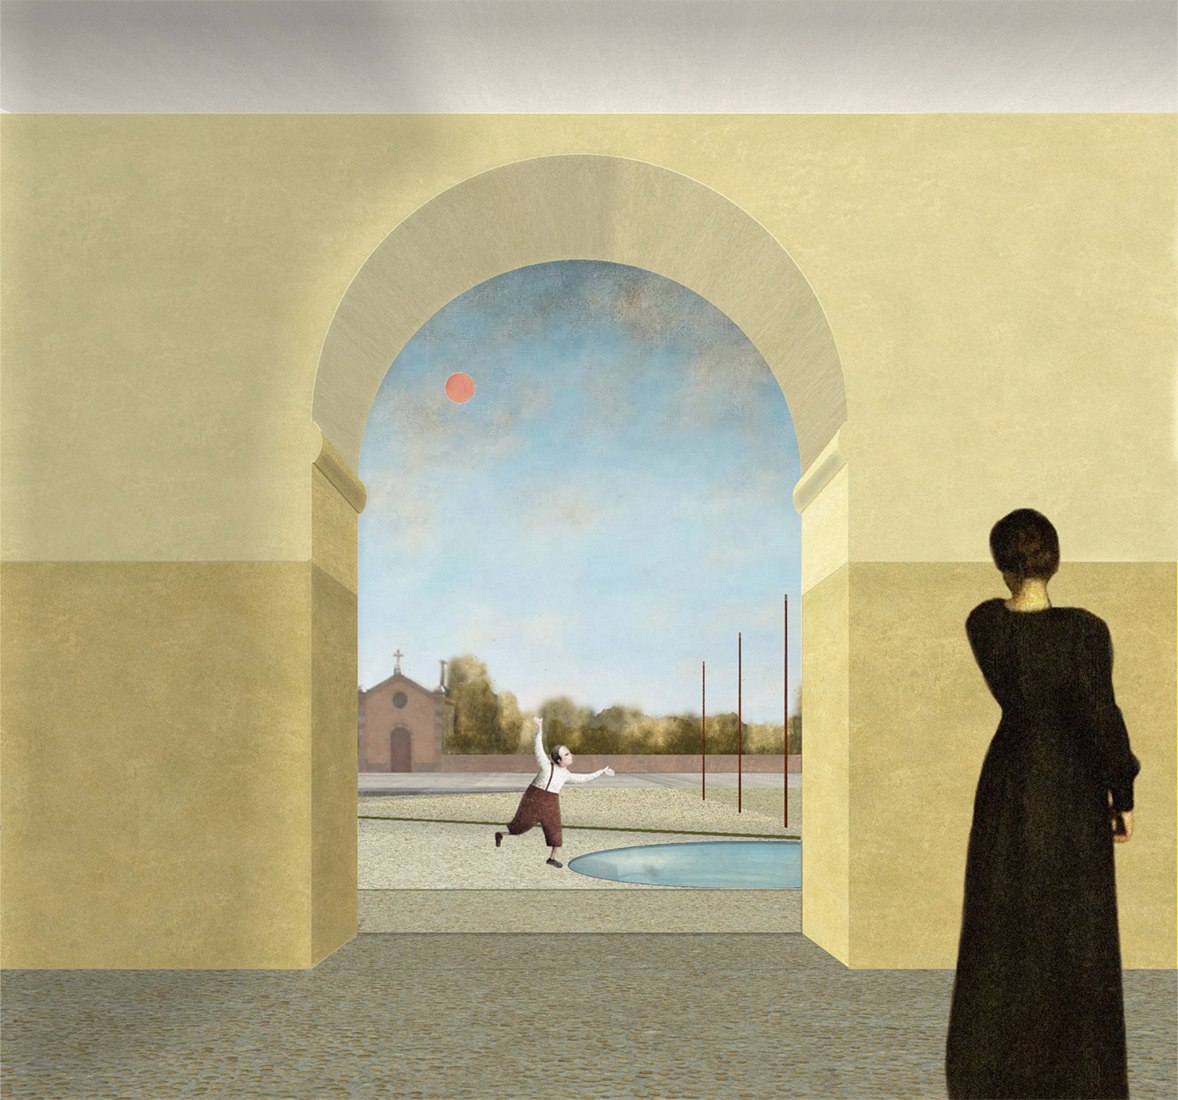 Rendering. Office X proposal for the Piazza Leoni in Torrechiara. Image courtesy of Office X